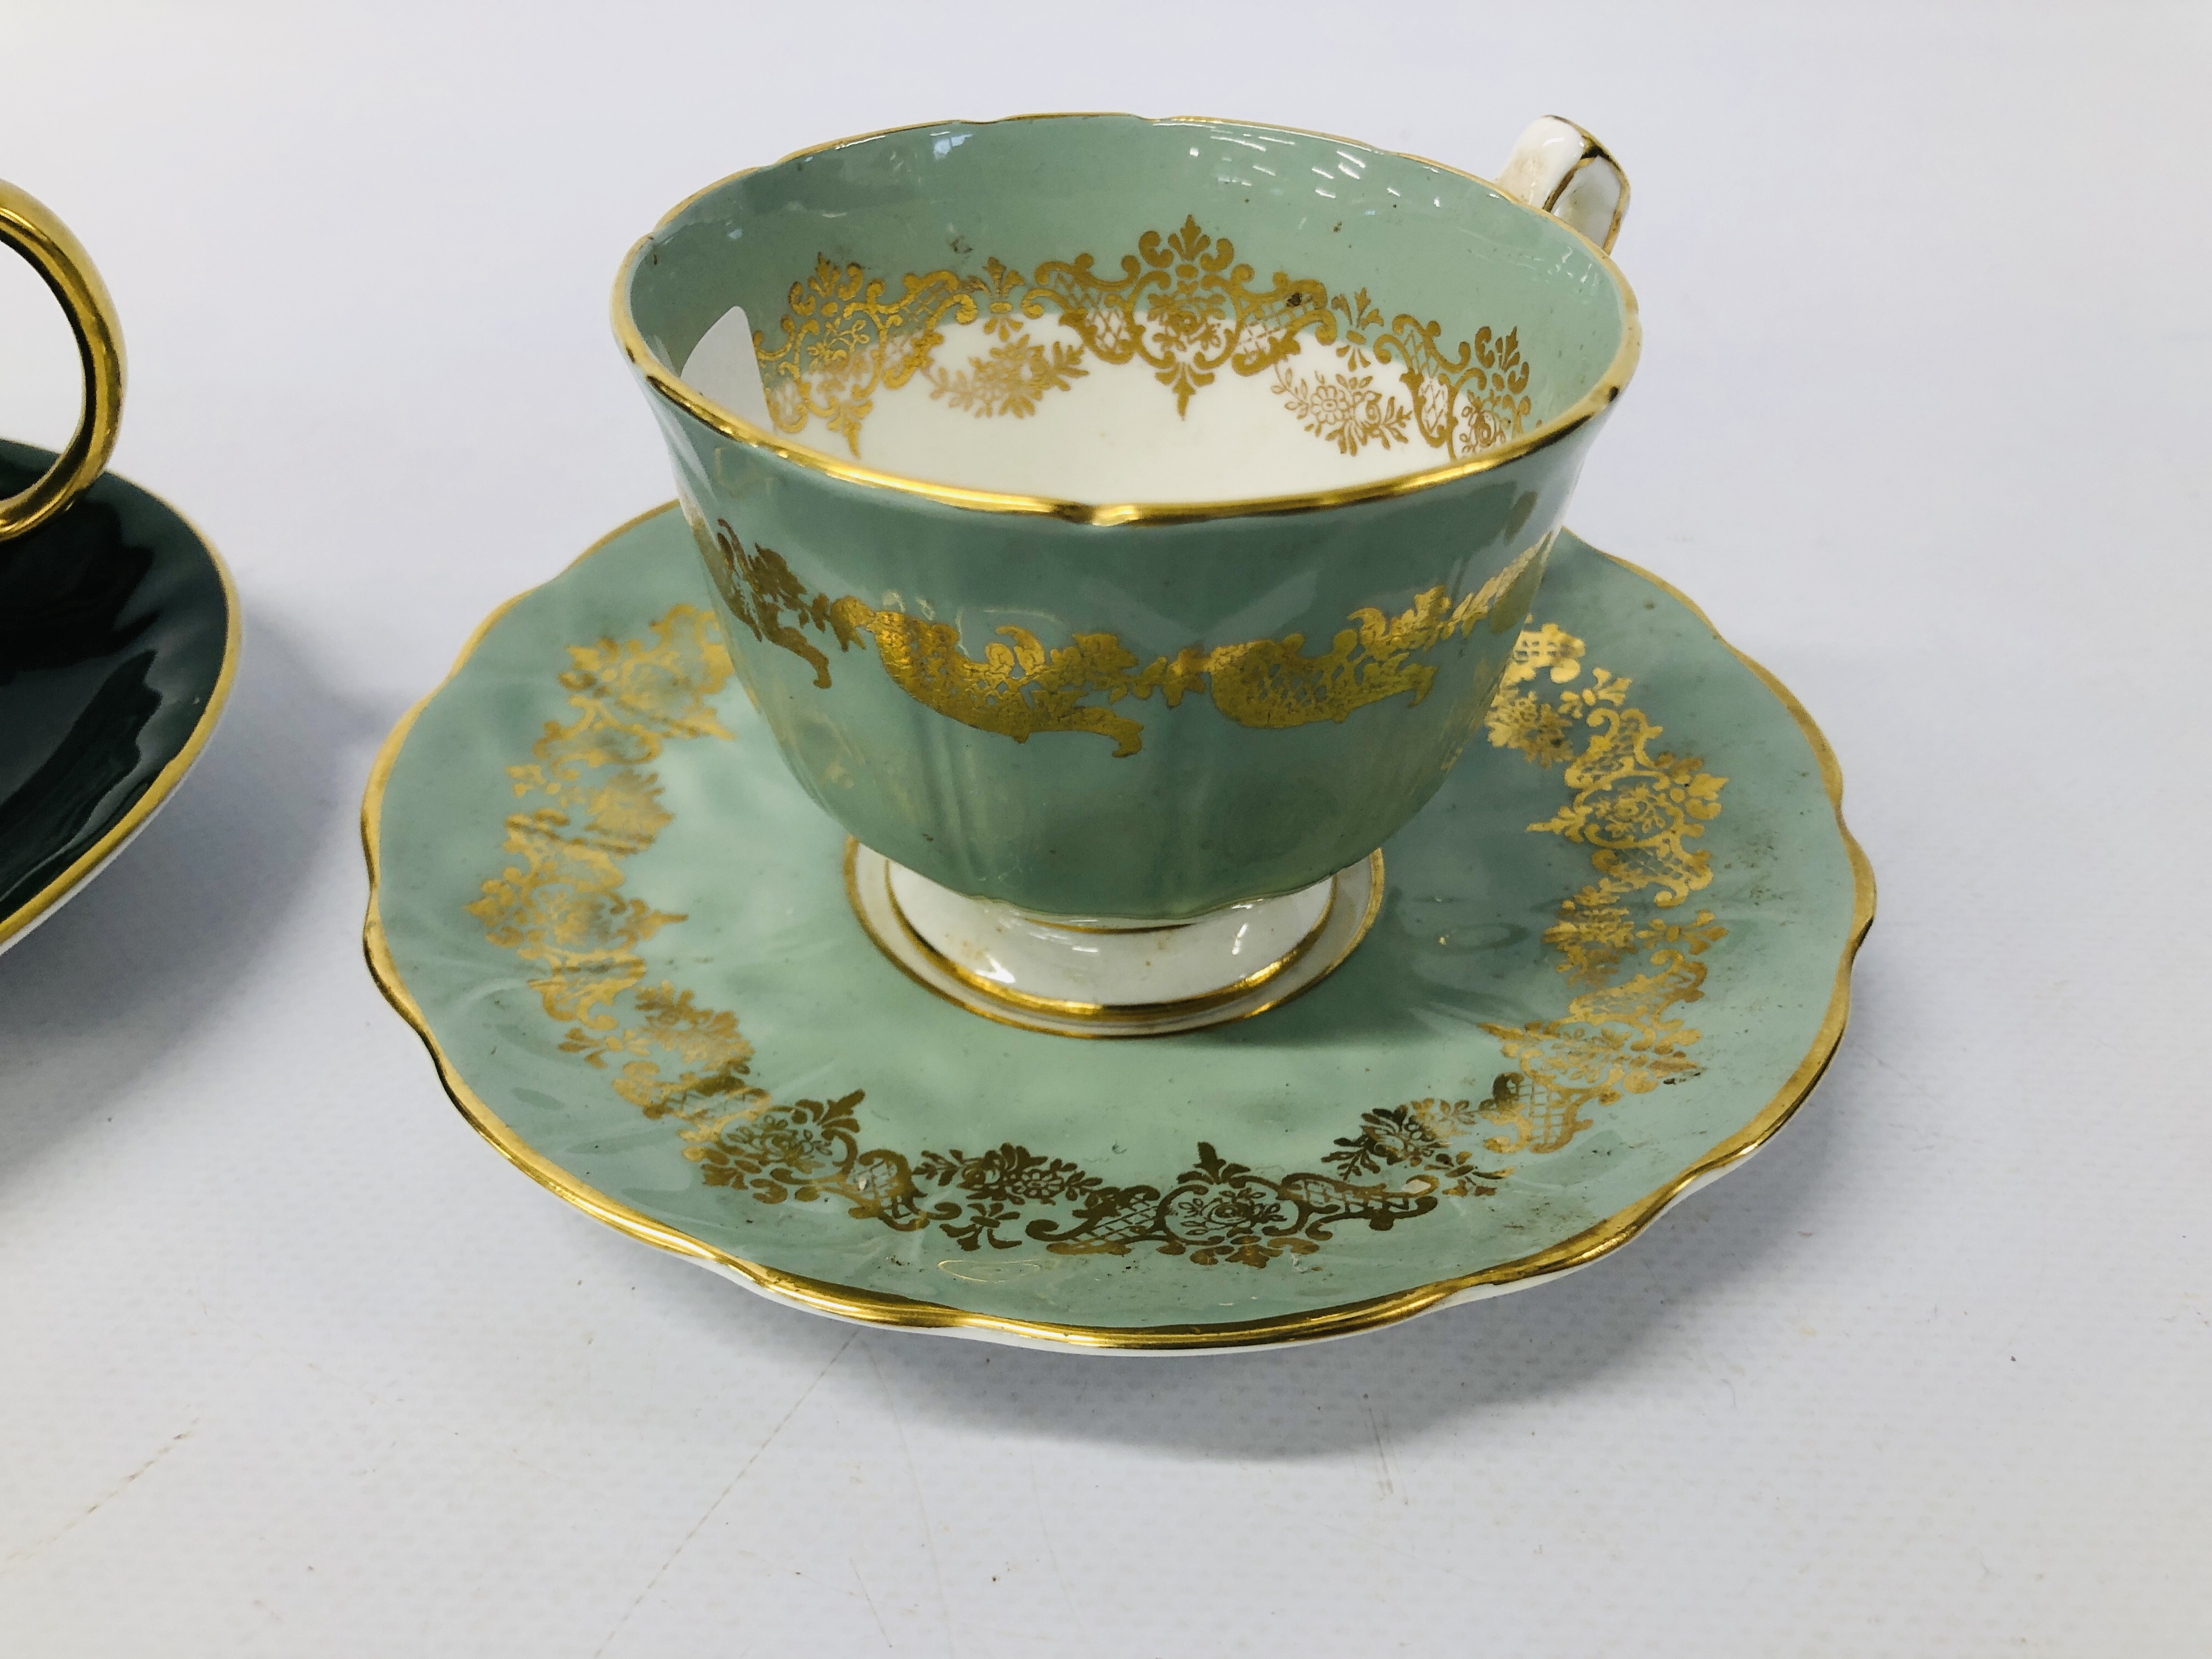 TWO AYNSLEY CUPS AND SAUCERS ONE IN THE ORCHARD DESIGN ALONG WITH AN AYNSLEY ORCHARD GOLD PIN DISH - Image 5 of 11